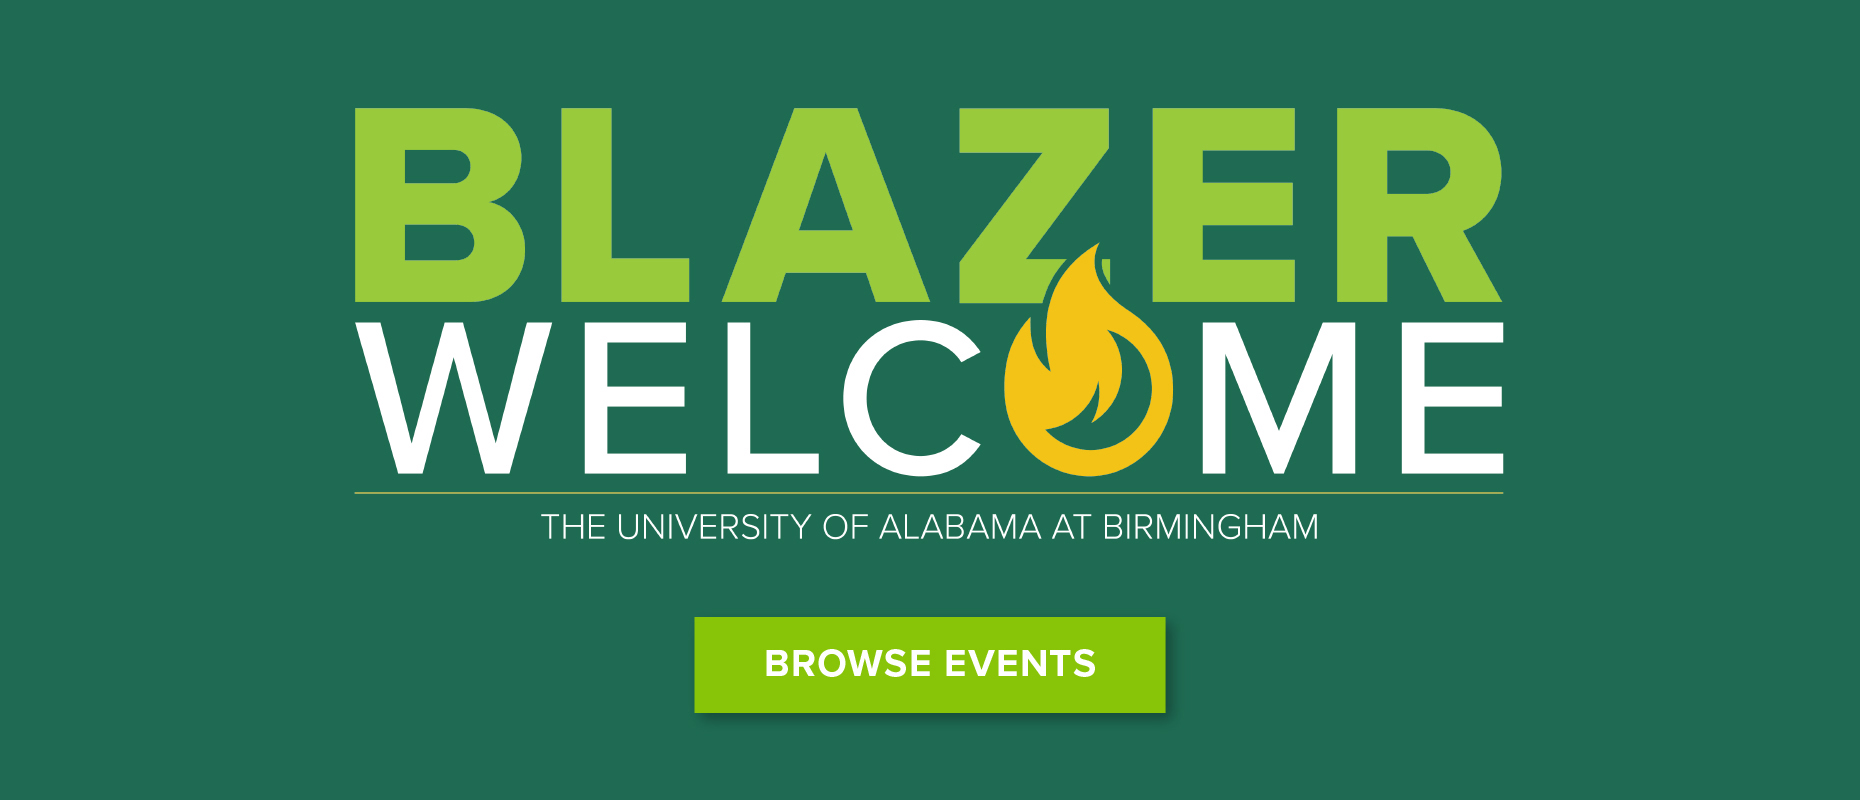 Blazer Welcome: Browse Events